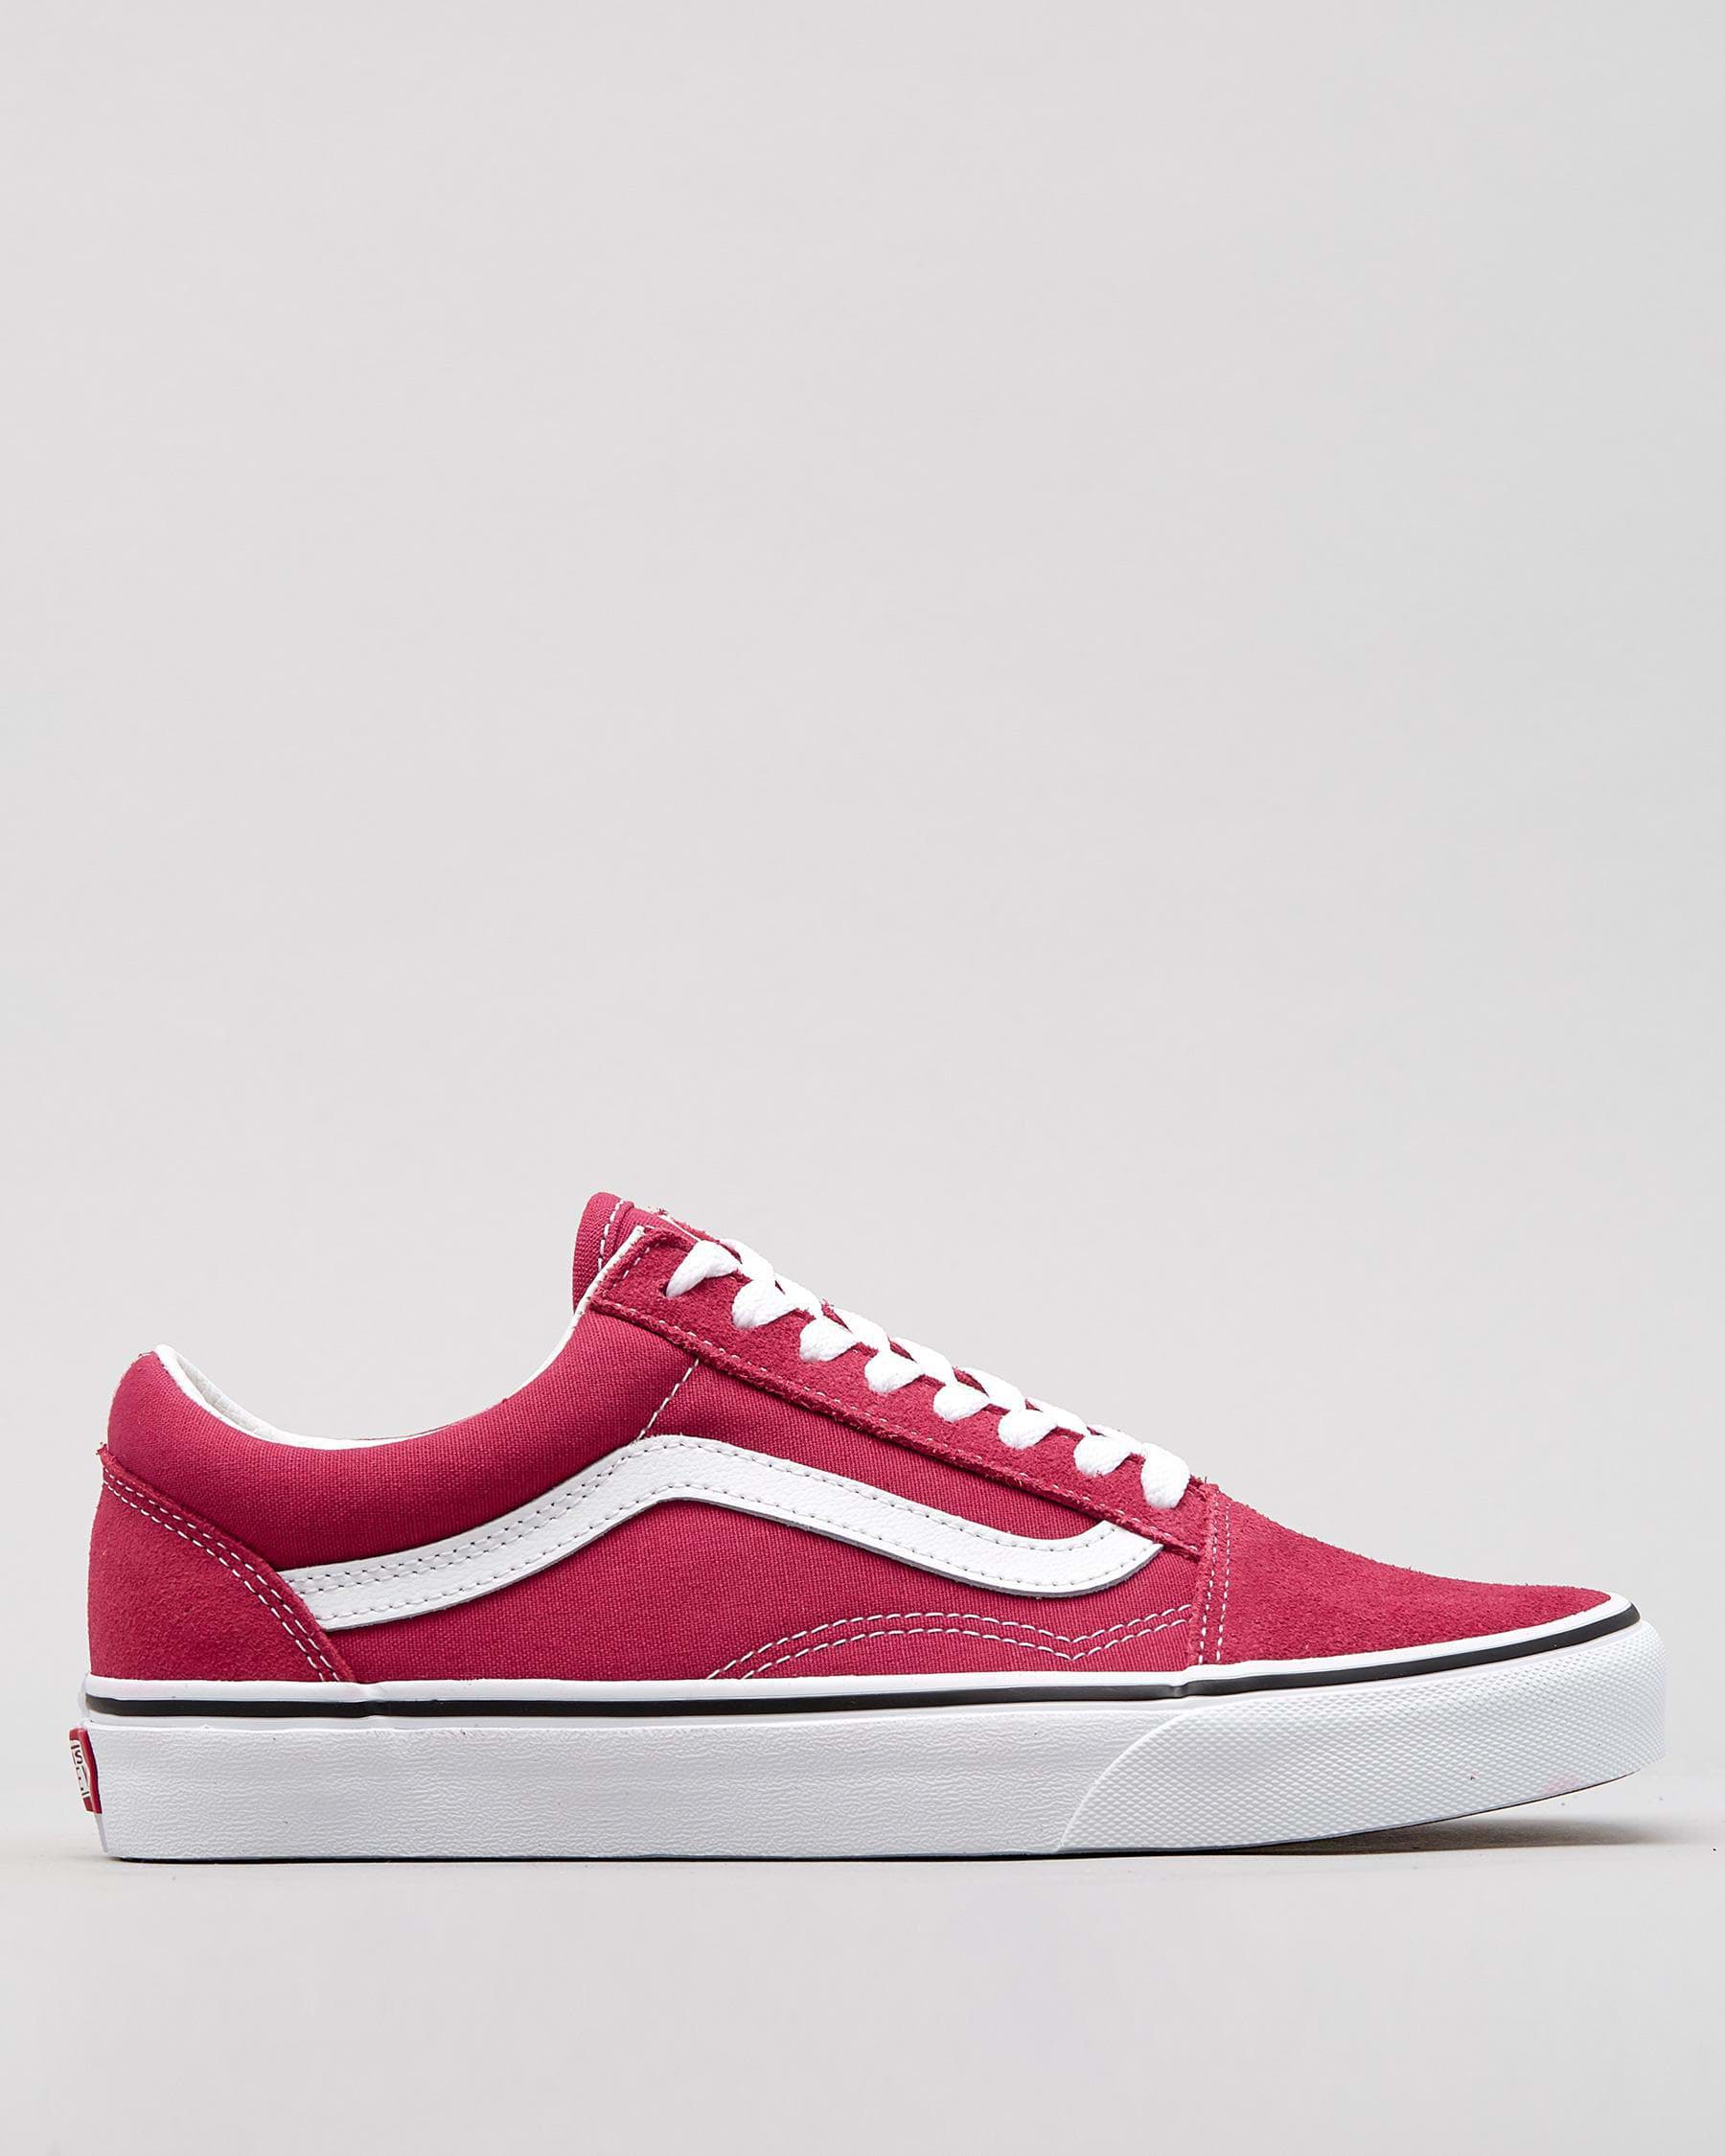 Vans Womens Old Skool Shoes In Cerise/ True White - Fast Shipping ...